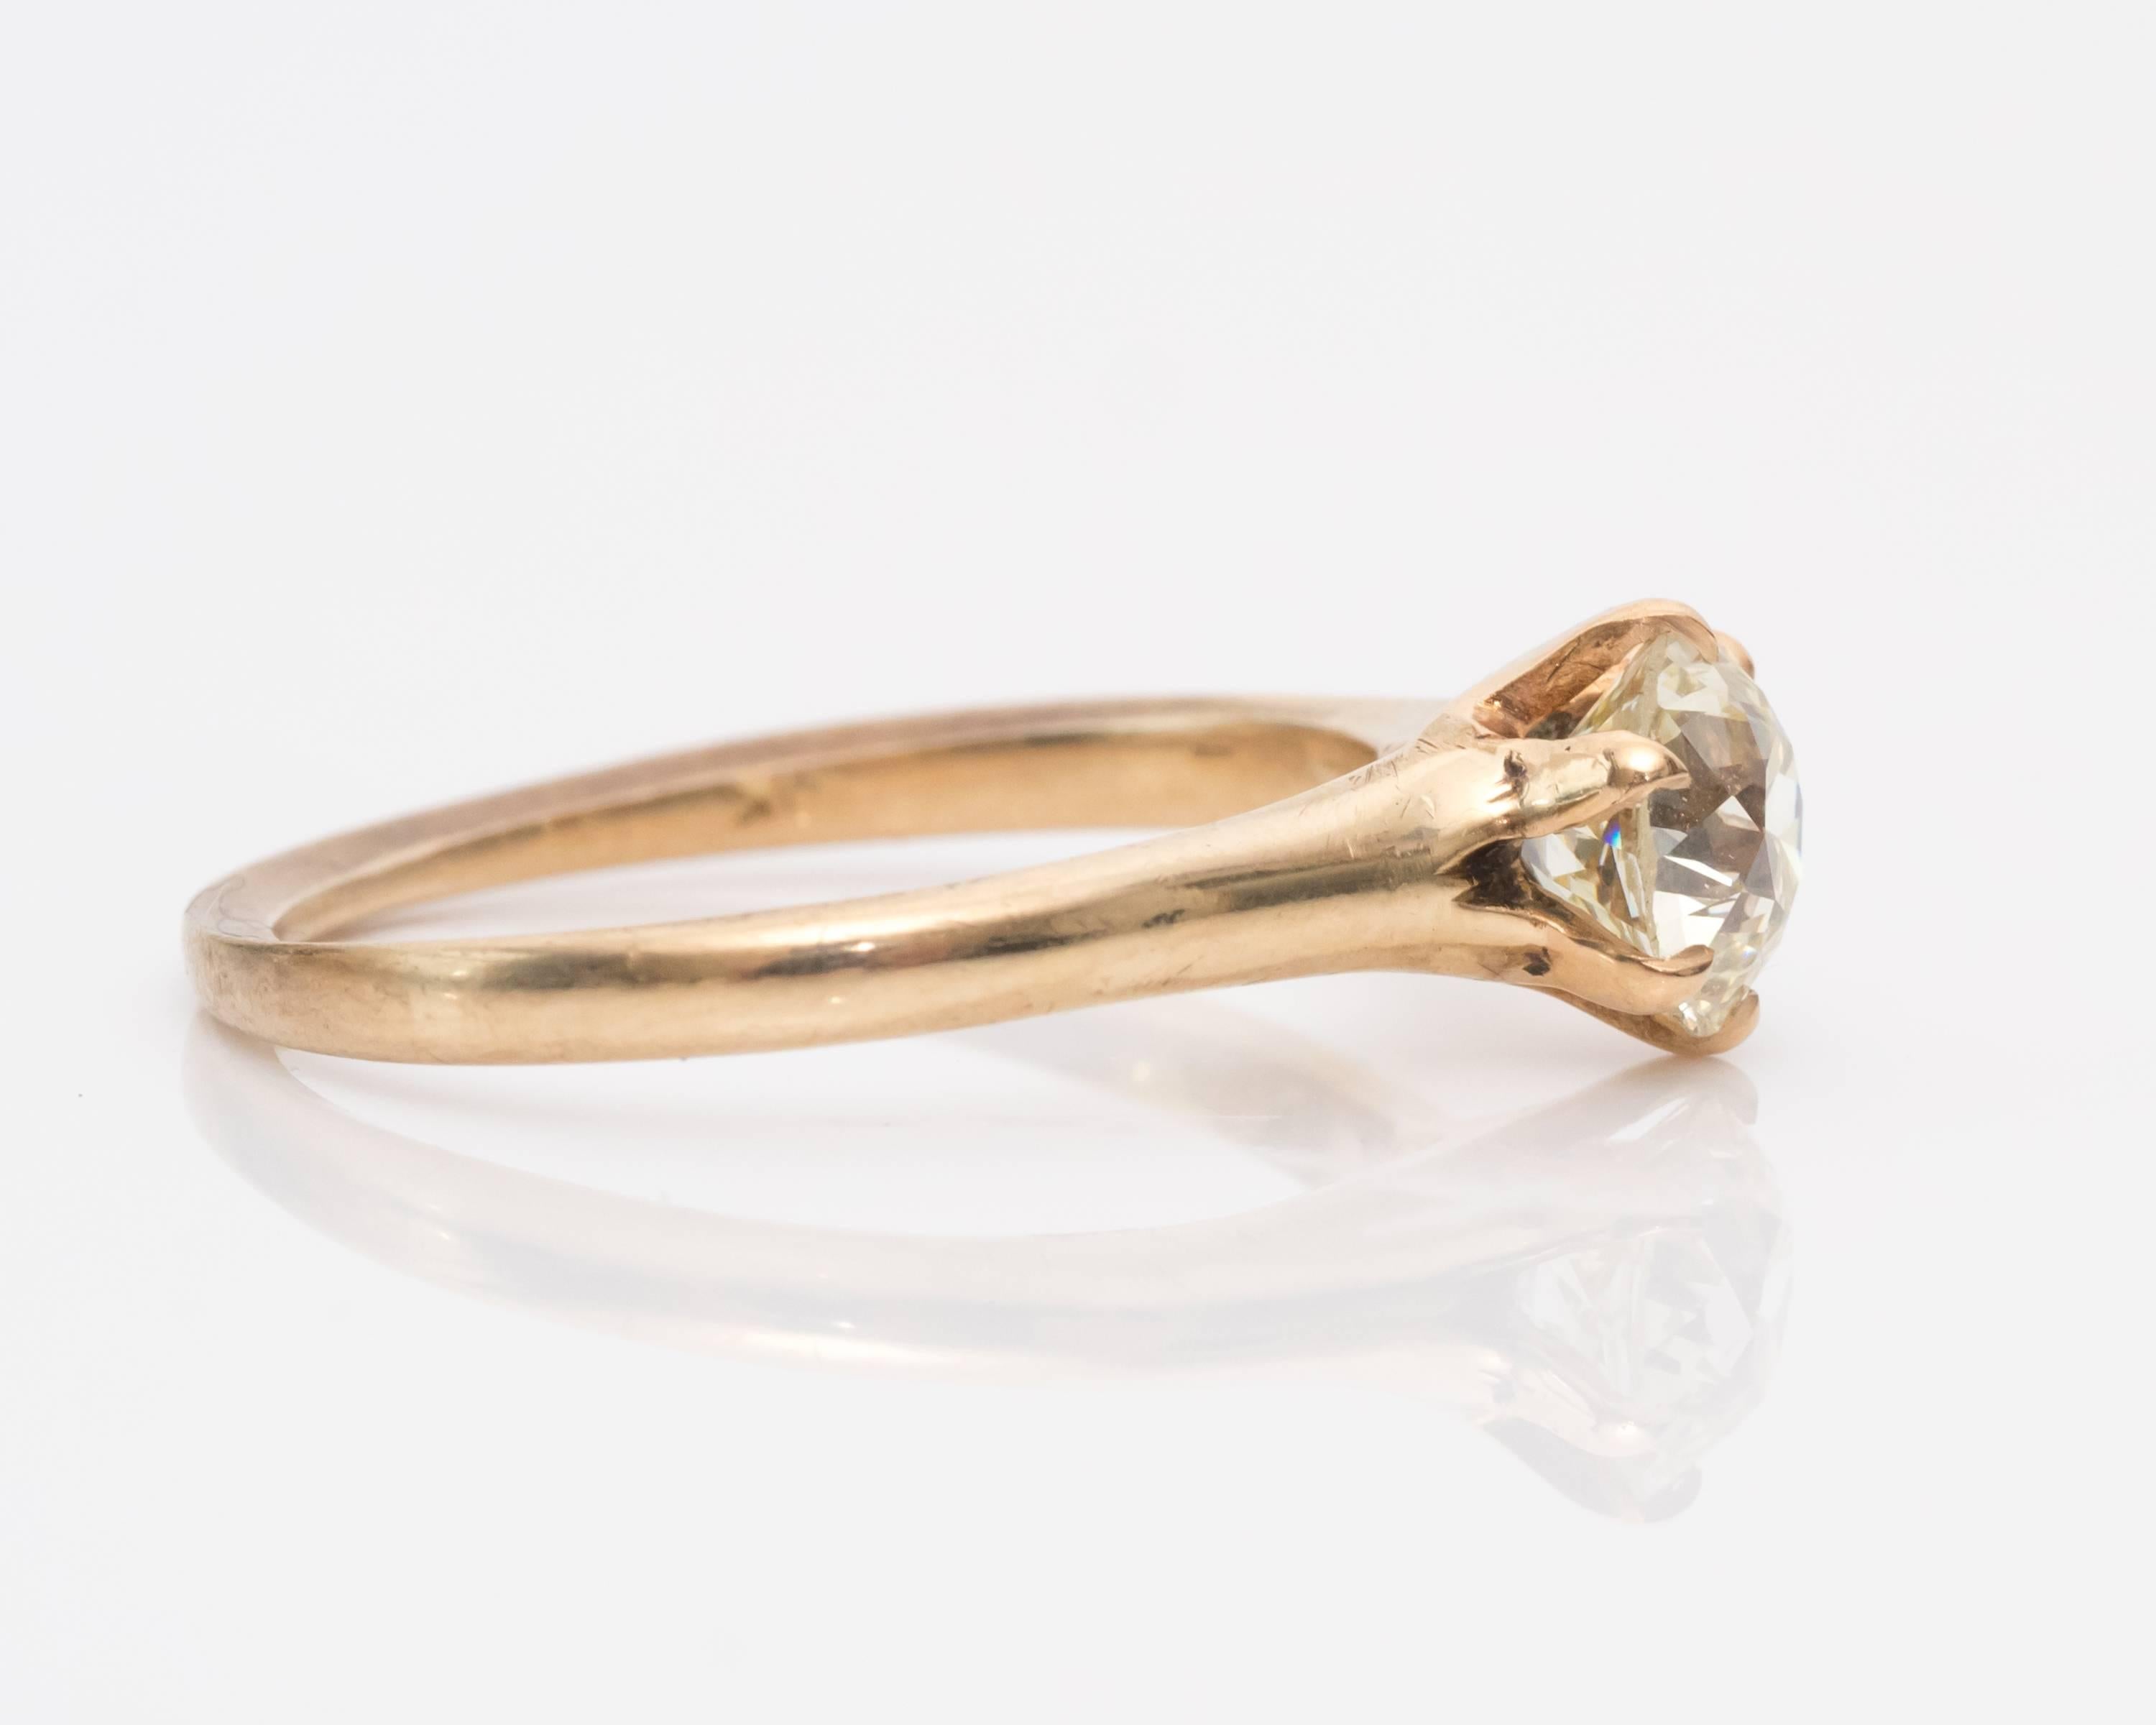 1905 GIA Certified 1.09 Carat Old Mine Diamond 10 Karat Gold Engagement Ring features a 1.09 Carat GIA-Certified Old Miner Center Stone set in a Six-Prong Frame, Crafted Entirely in 10 Karat Yellow Gold
The Sparkle and Brilliance of this Stone is